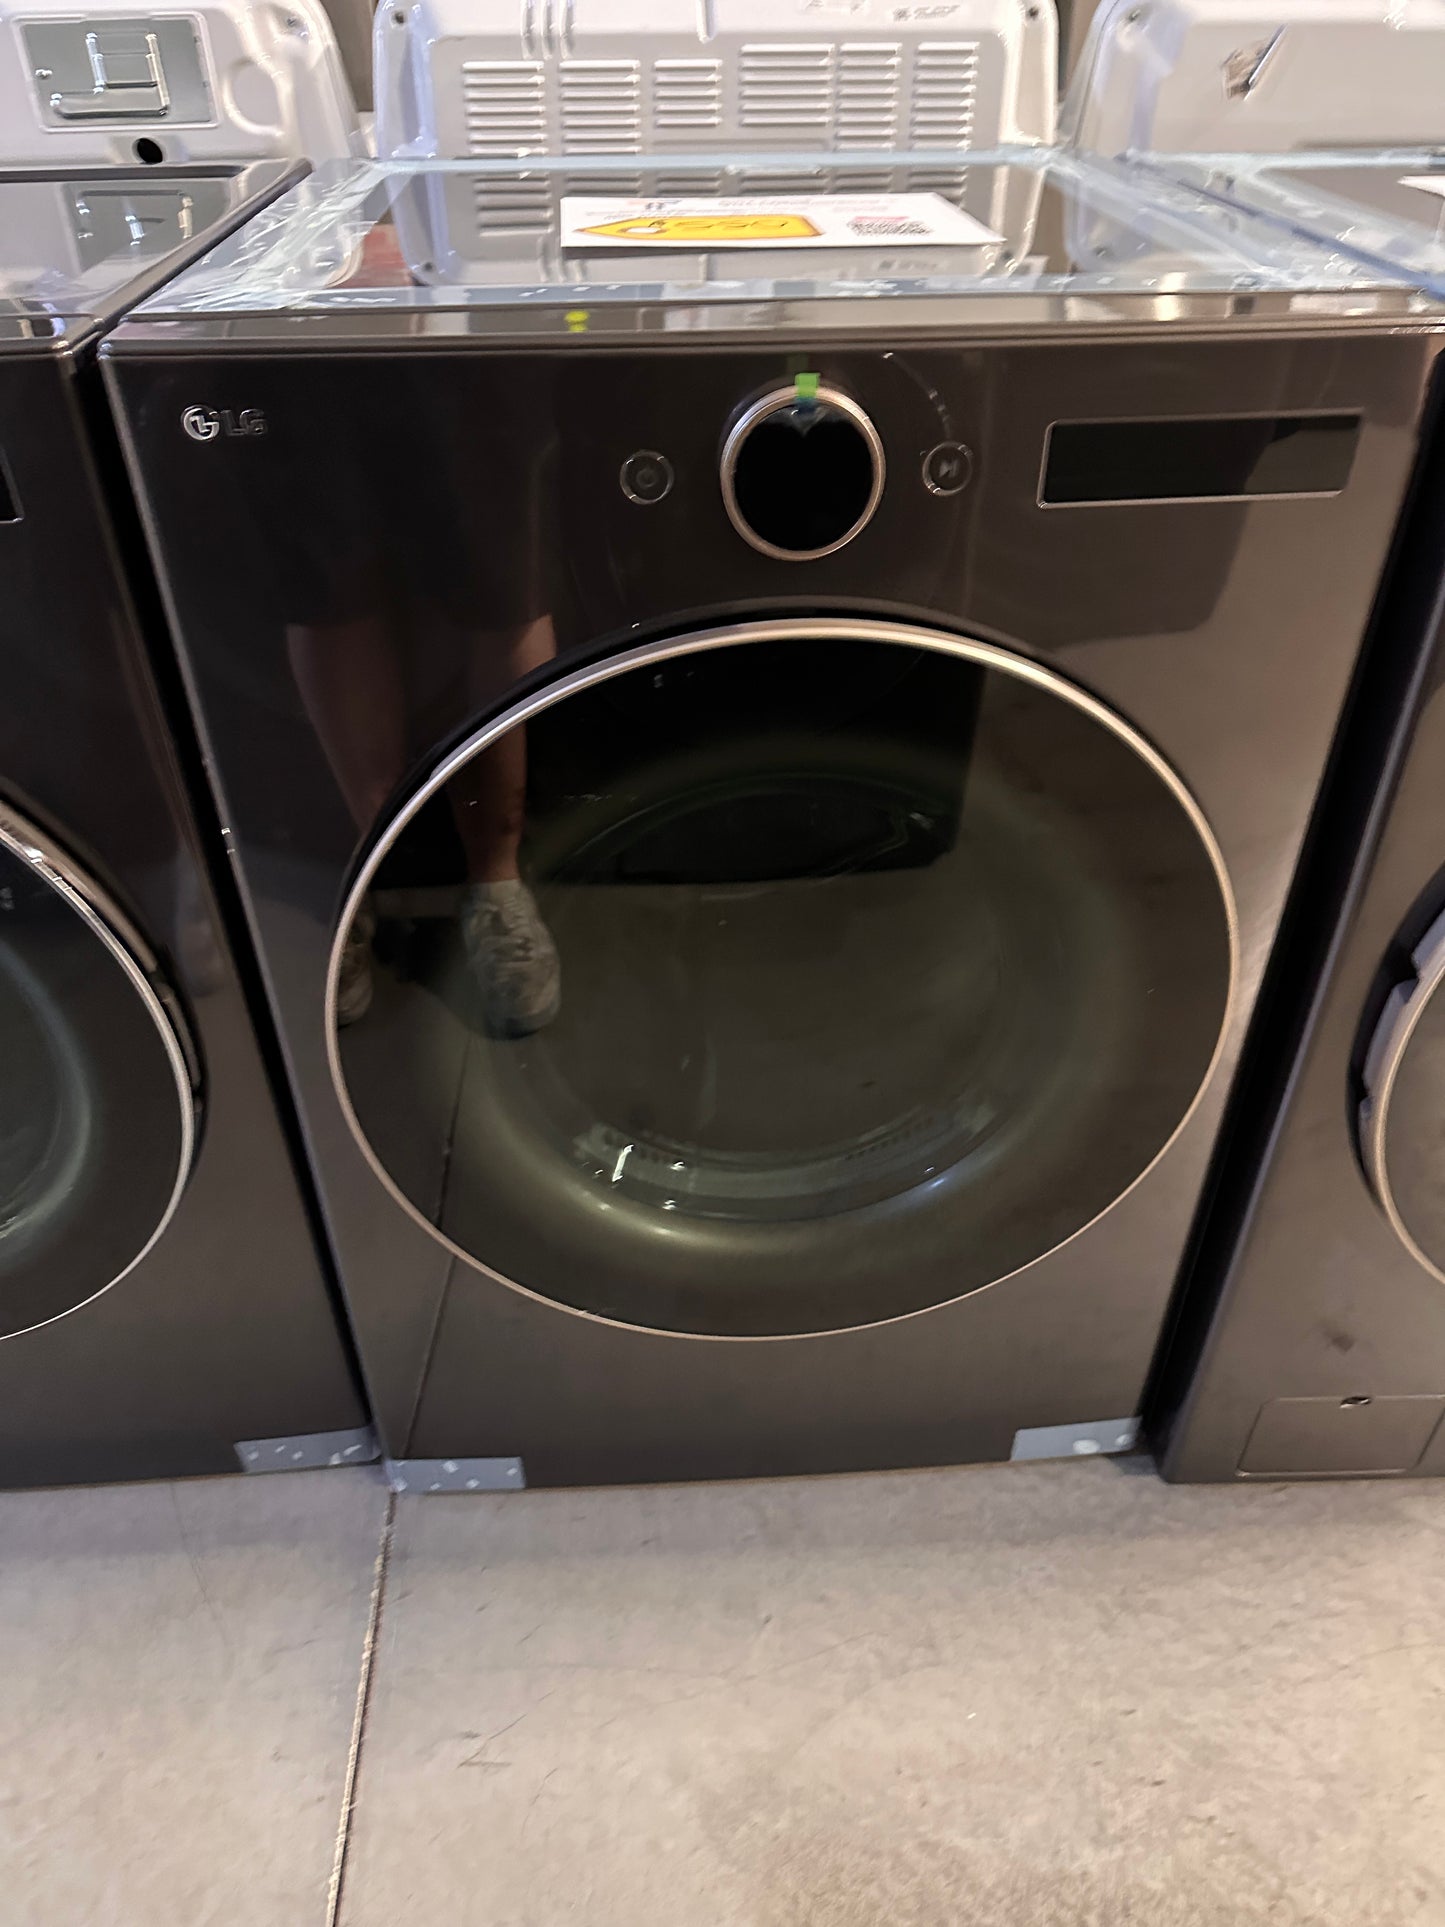 DISCOUNTED NEW SMART ELECTRIC LG DRYER WITH SENSOR DRY MODEL: DLEX6500B  DRY12496